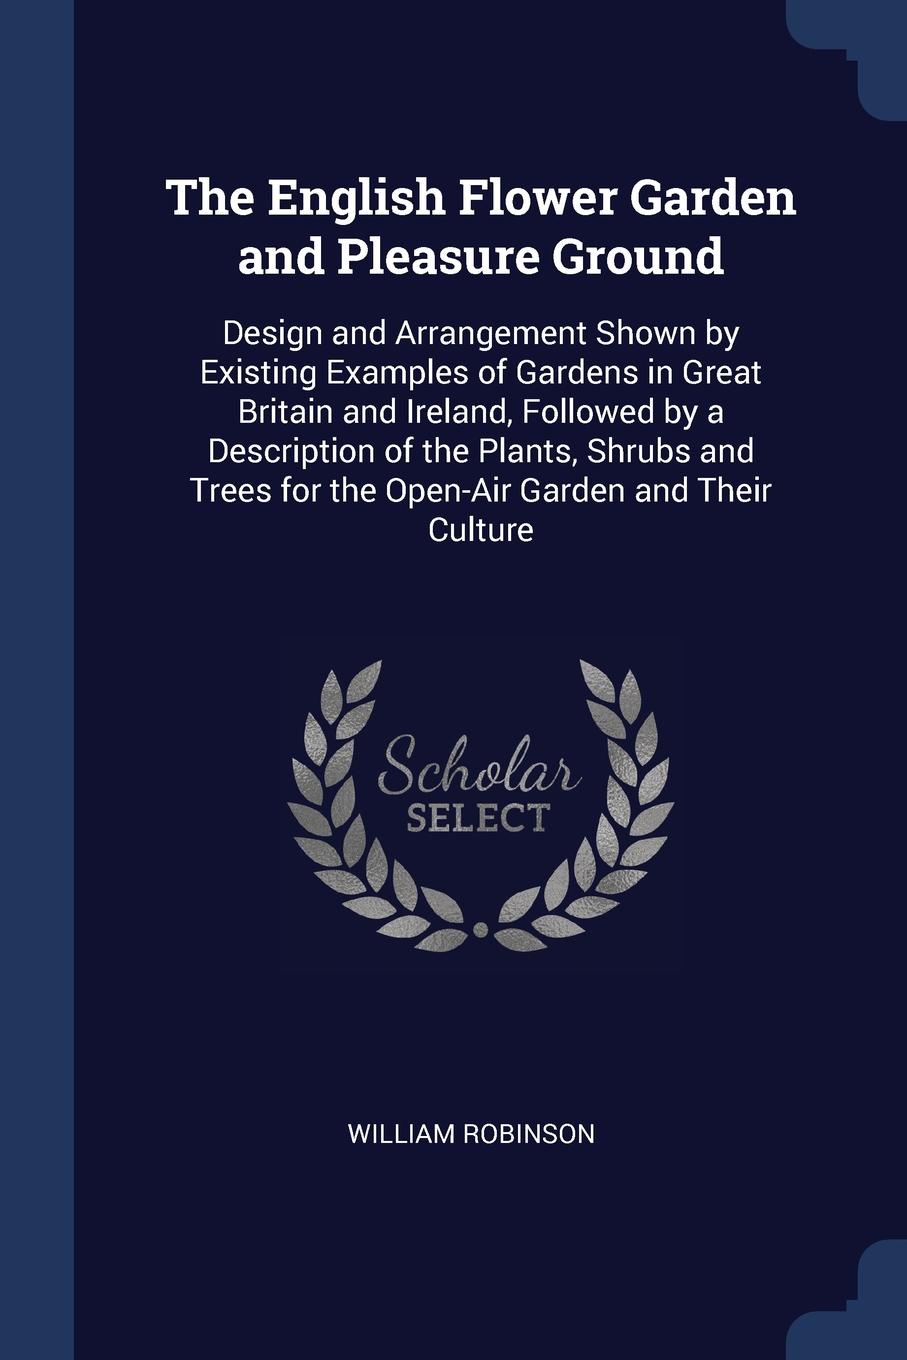 The English Flower Garden and Pleasure Ground. Design and Arrangement Shown by Existing Examples of Gardens in Great Britain and Ireland, Followed by a Description of the Plants, Shrubs and Trees for the Open-Air Garden and Their Culture